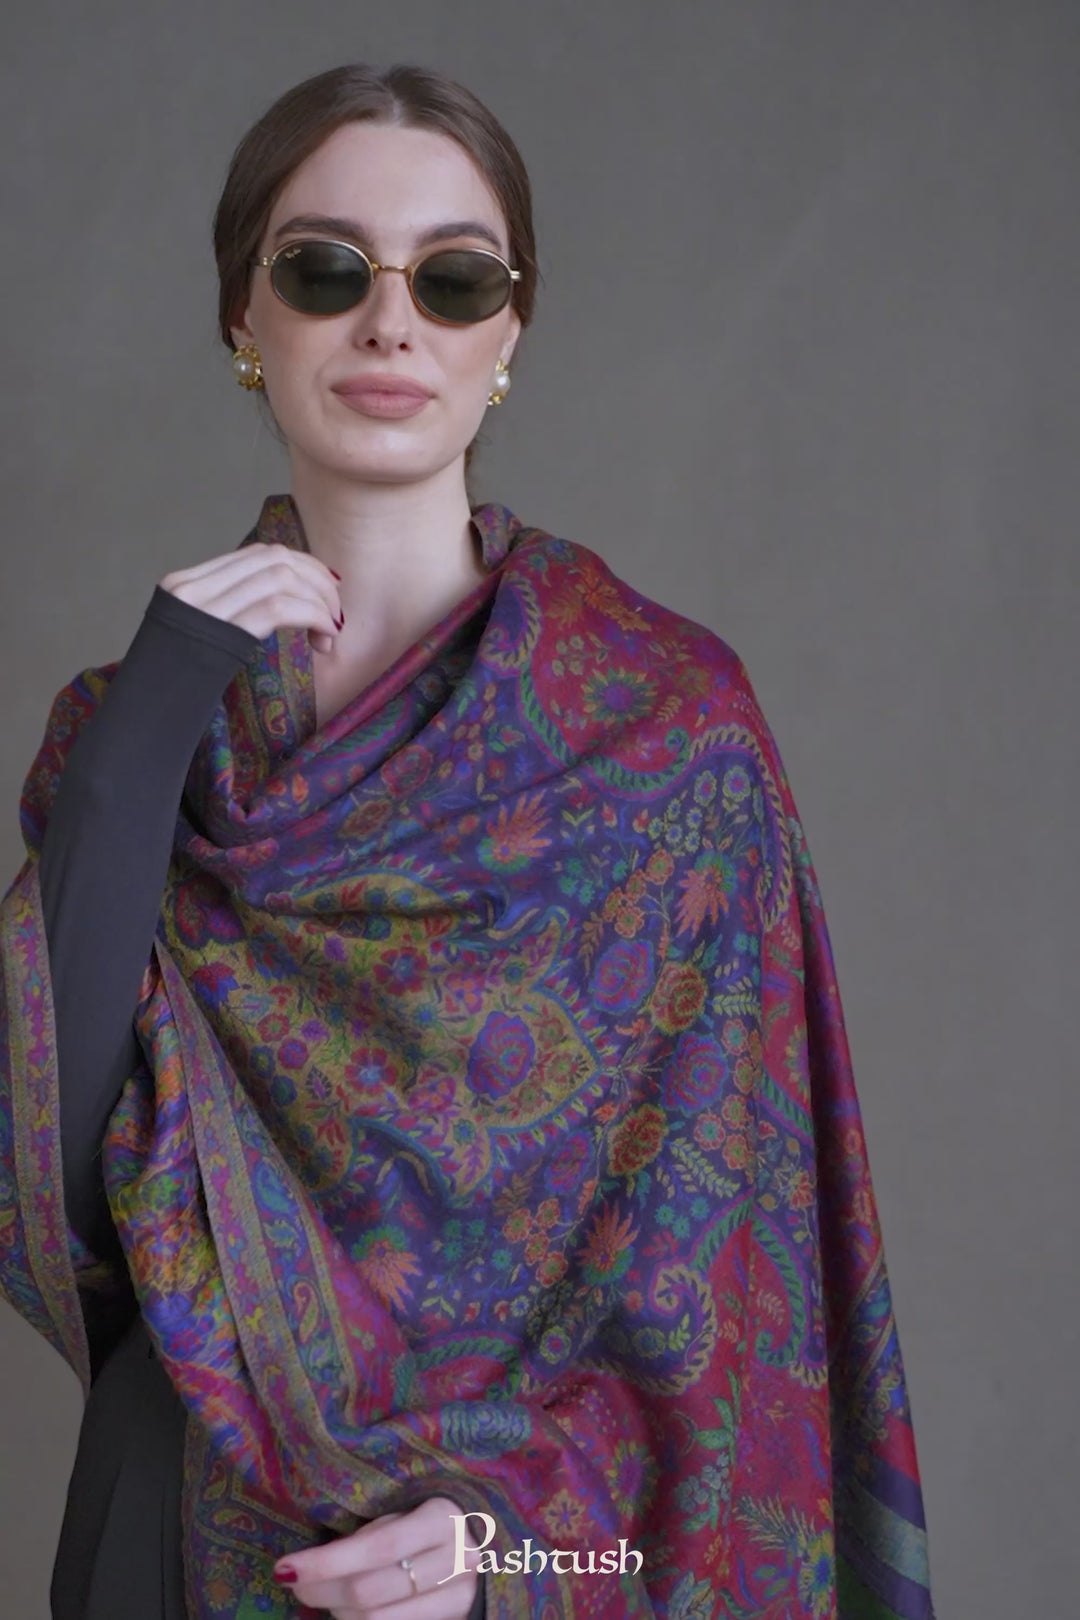 Pashtush Womens 100% Pure Wool With Woolmark Certificate Shawl, Antique Paisley Woven Design, Multicoloured